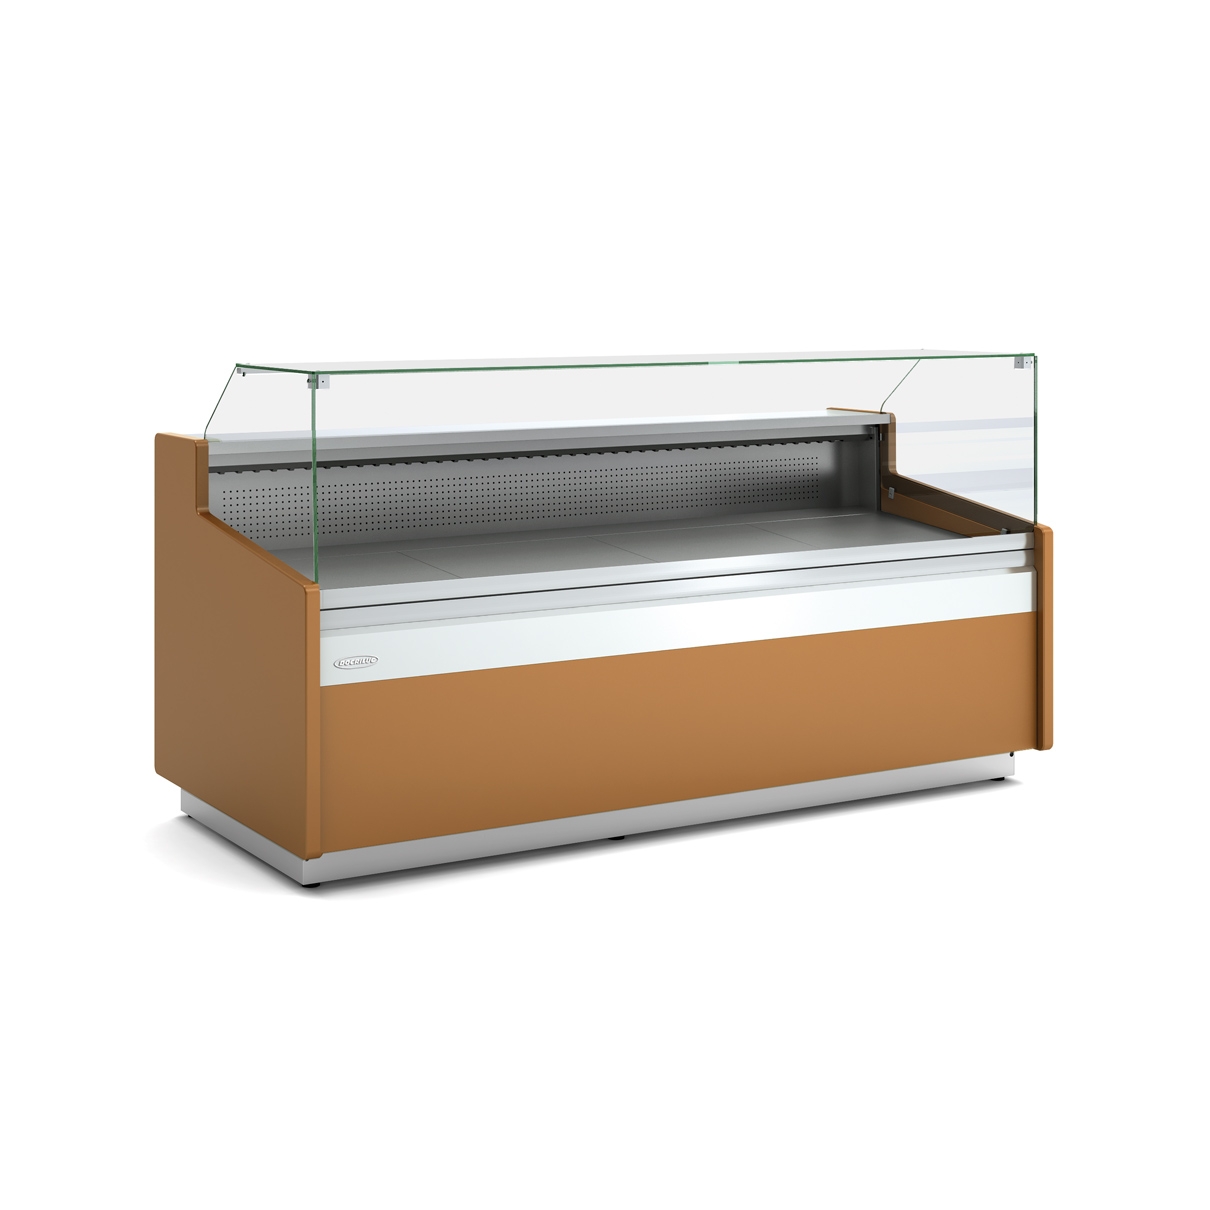 MODULAR REFRIGERATED DISPLAY CABINET VE-9-RCB-TF